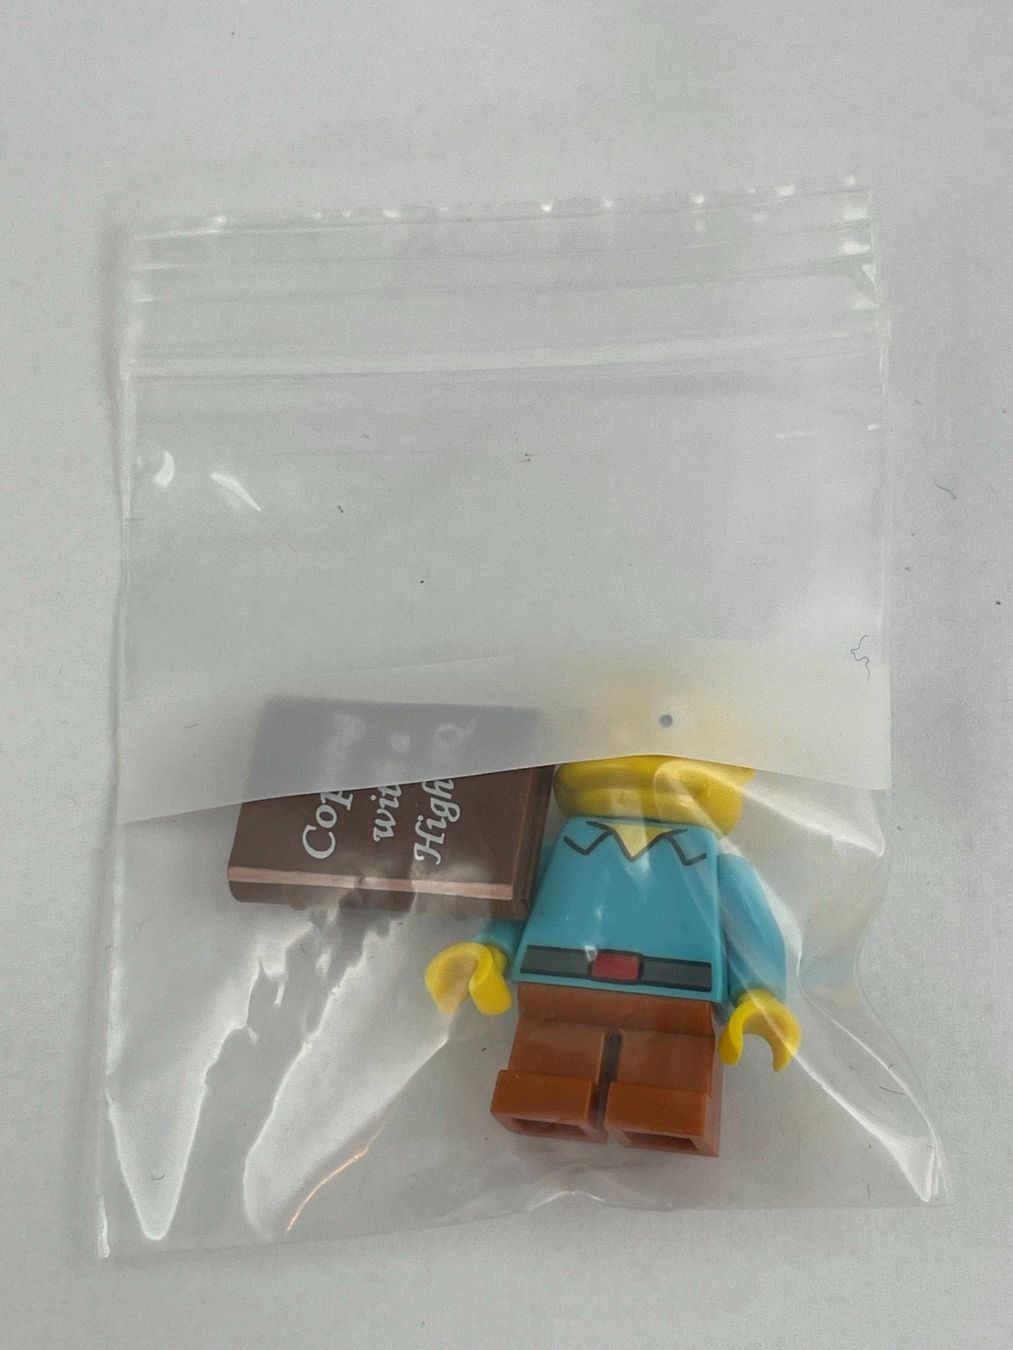 Lego Simpsons Minifigur mit Buch - Coping with a High IQ